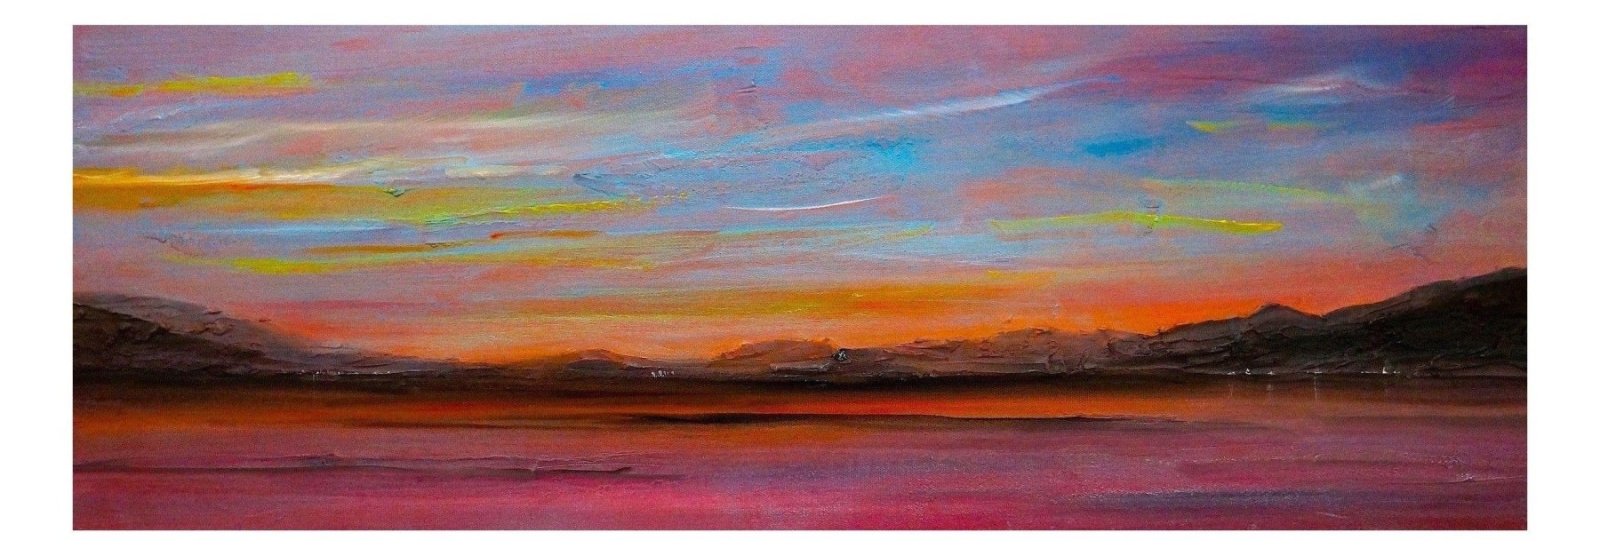 Loch Lomond Dusk-Panoramic Prints-Scottish Lochs & Mountains Art Gallery-Paintings, Prints, Homeware, Art Gifts From Scotland By Scottish Artist Kevin Hunter